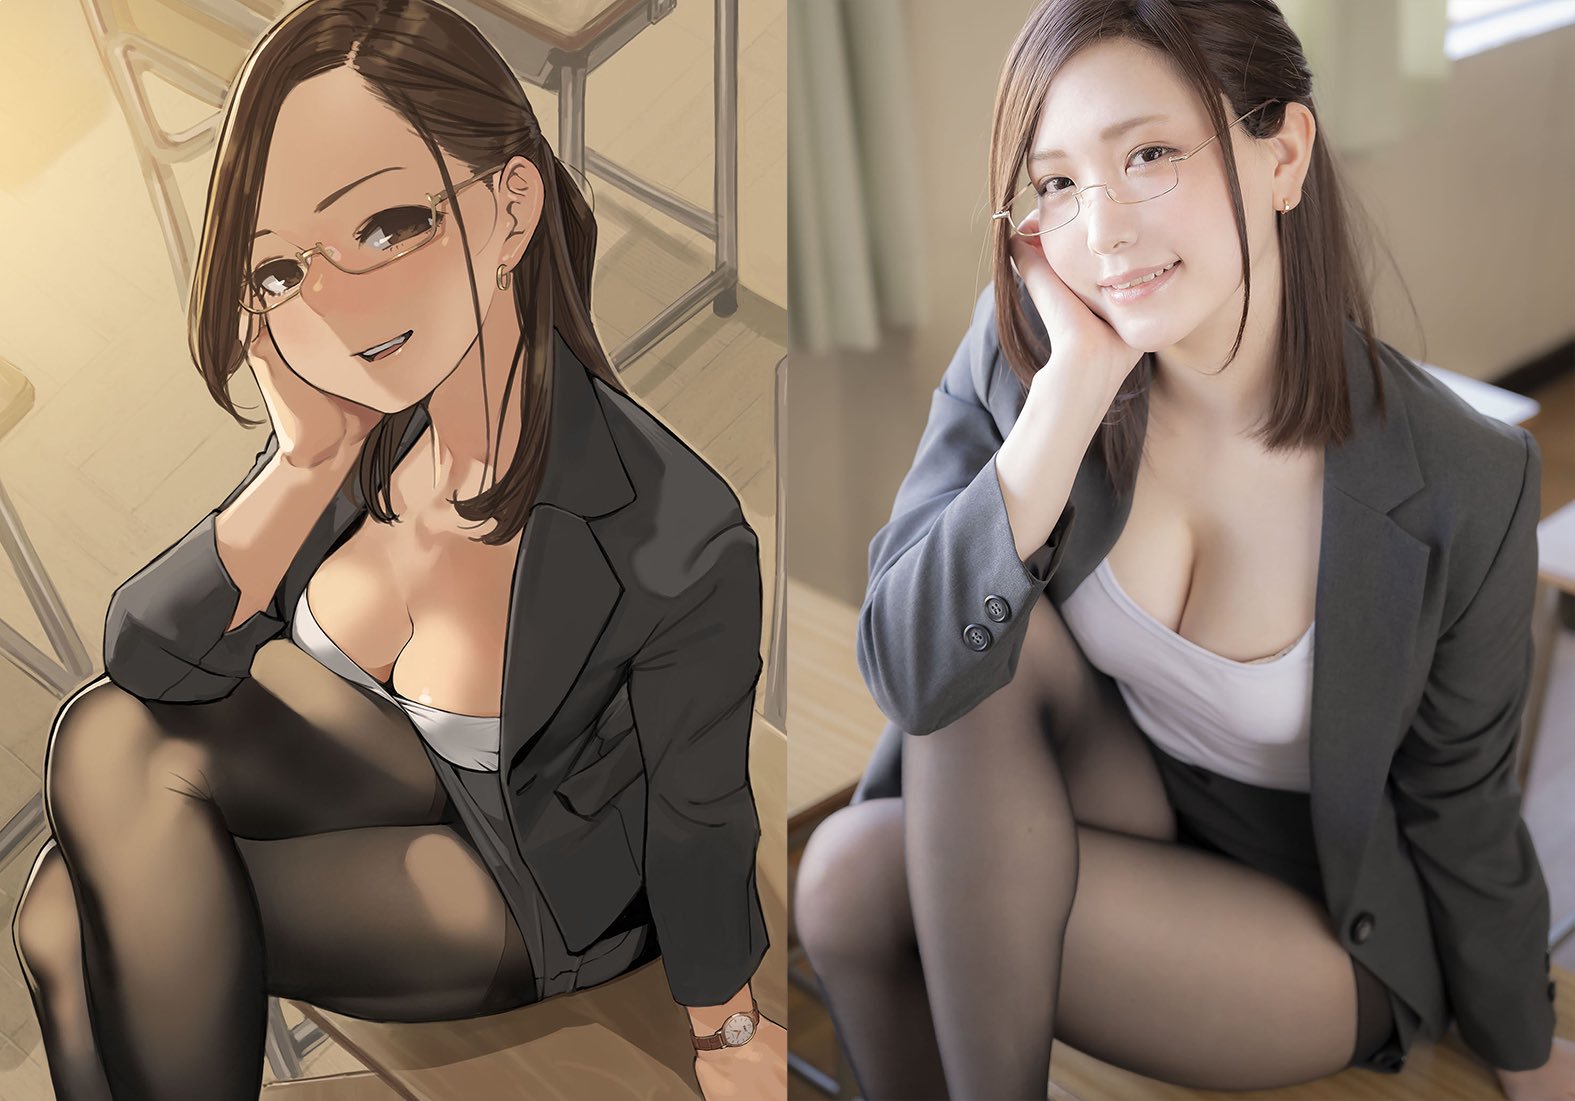 Appreciation for pantyhose as much - Real Naked Girls